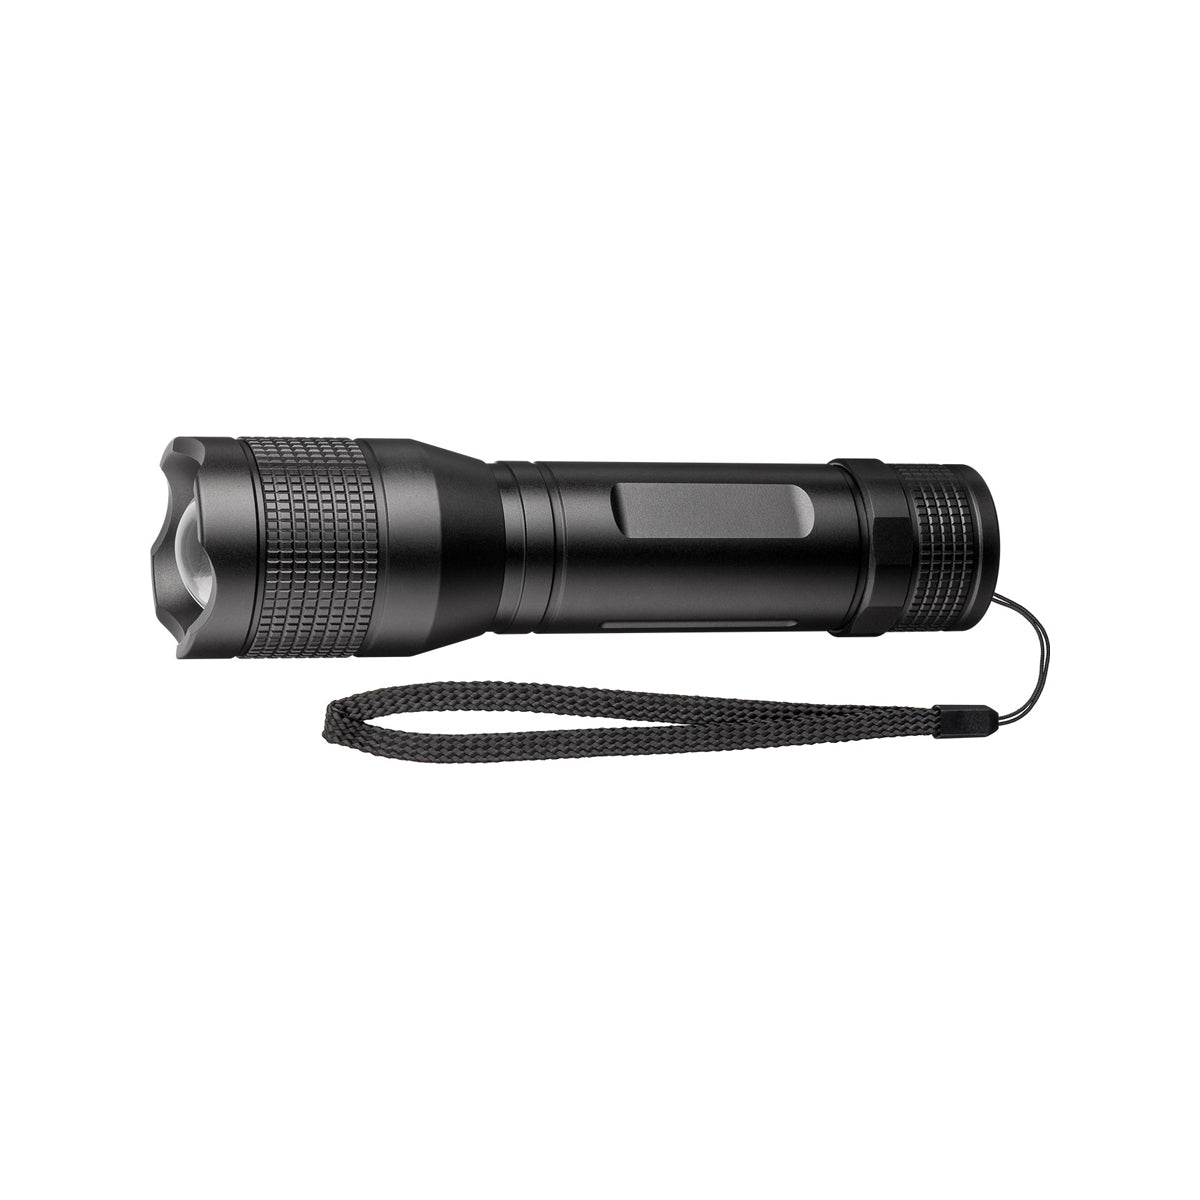 Goobay LED Flashlight High Powered Super Bright IPX7 Waterproof for Camping Hiking Emergency.